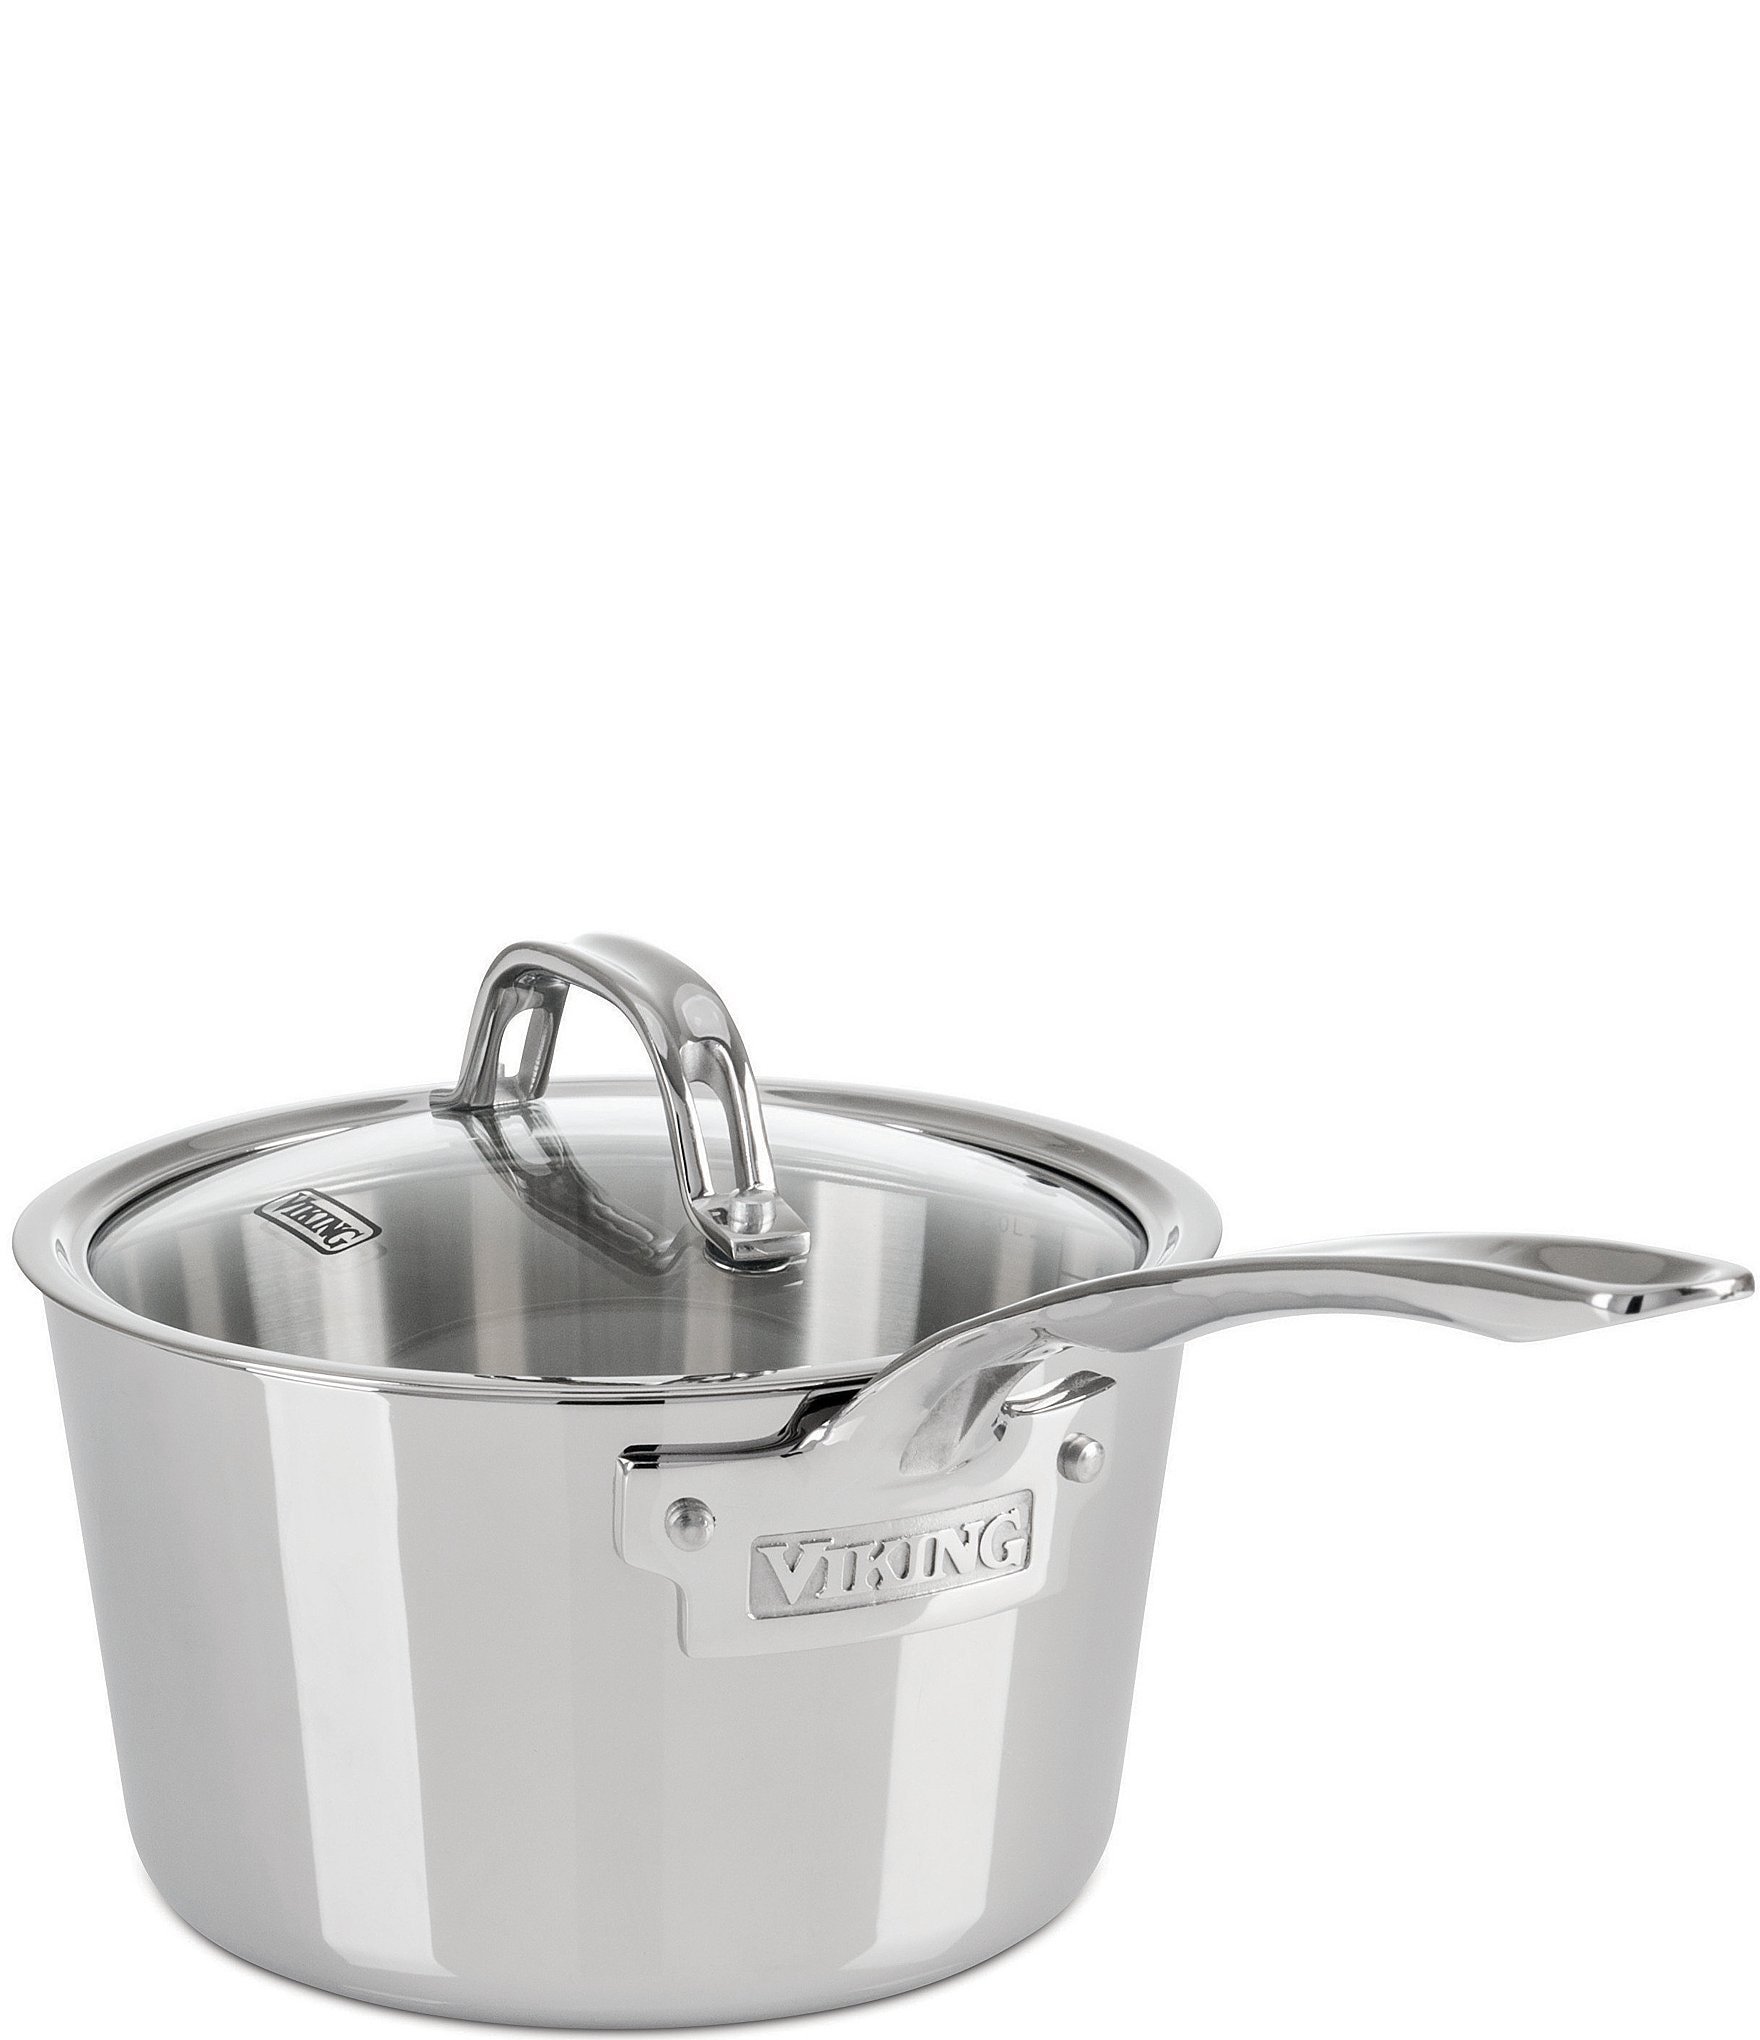 https://dimg.dillards.com/is/image/DillardsZoom/zoom/viking-3-ply-contemporary-stainless-steel-saucepan-with-lid/20027354_zi.jpg